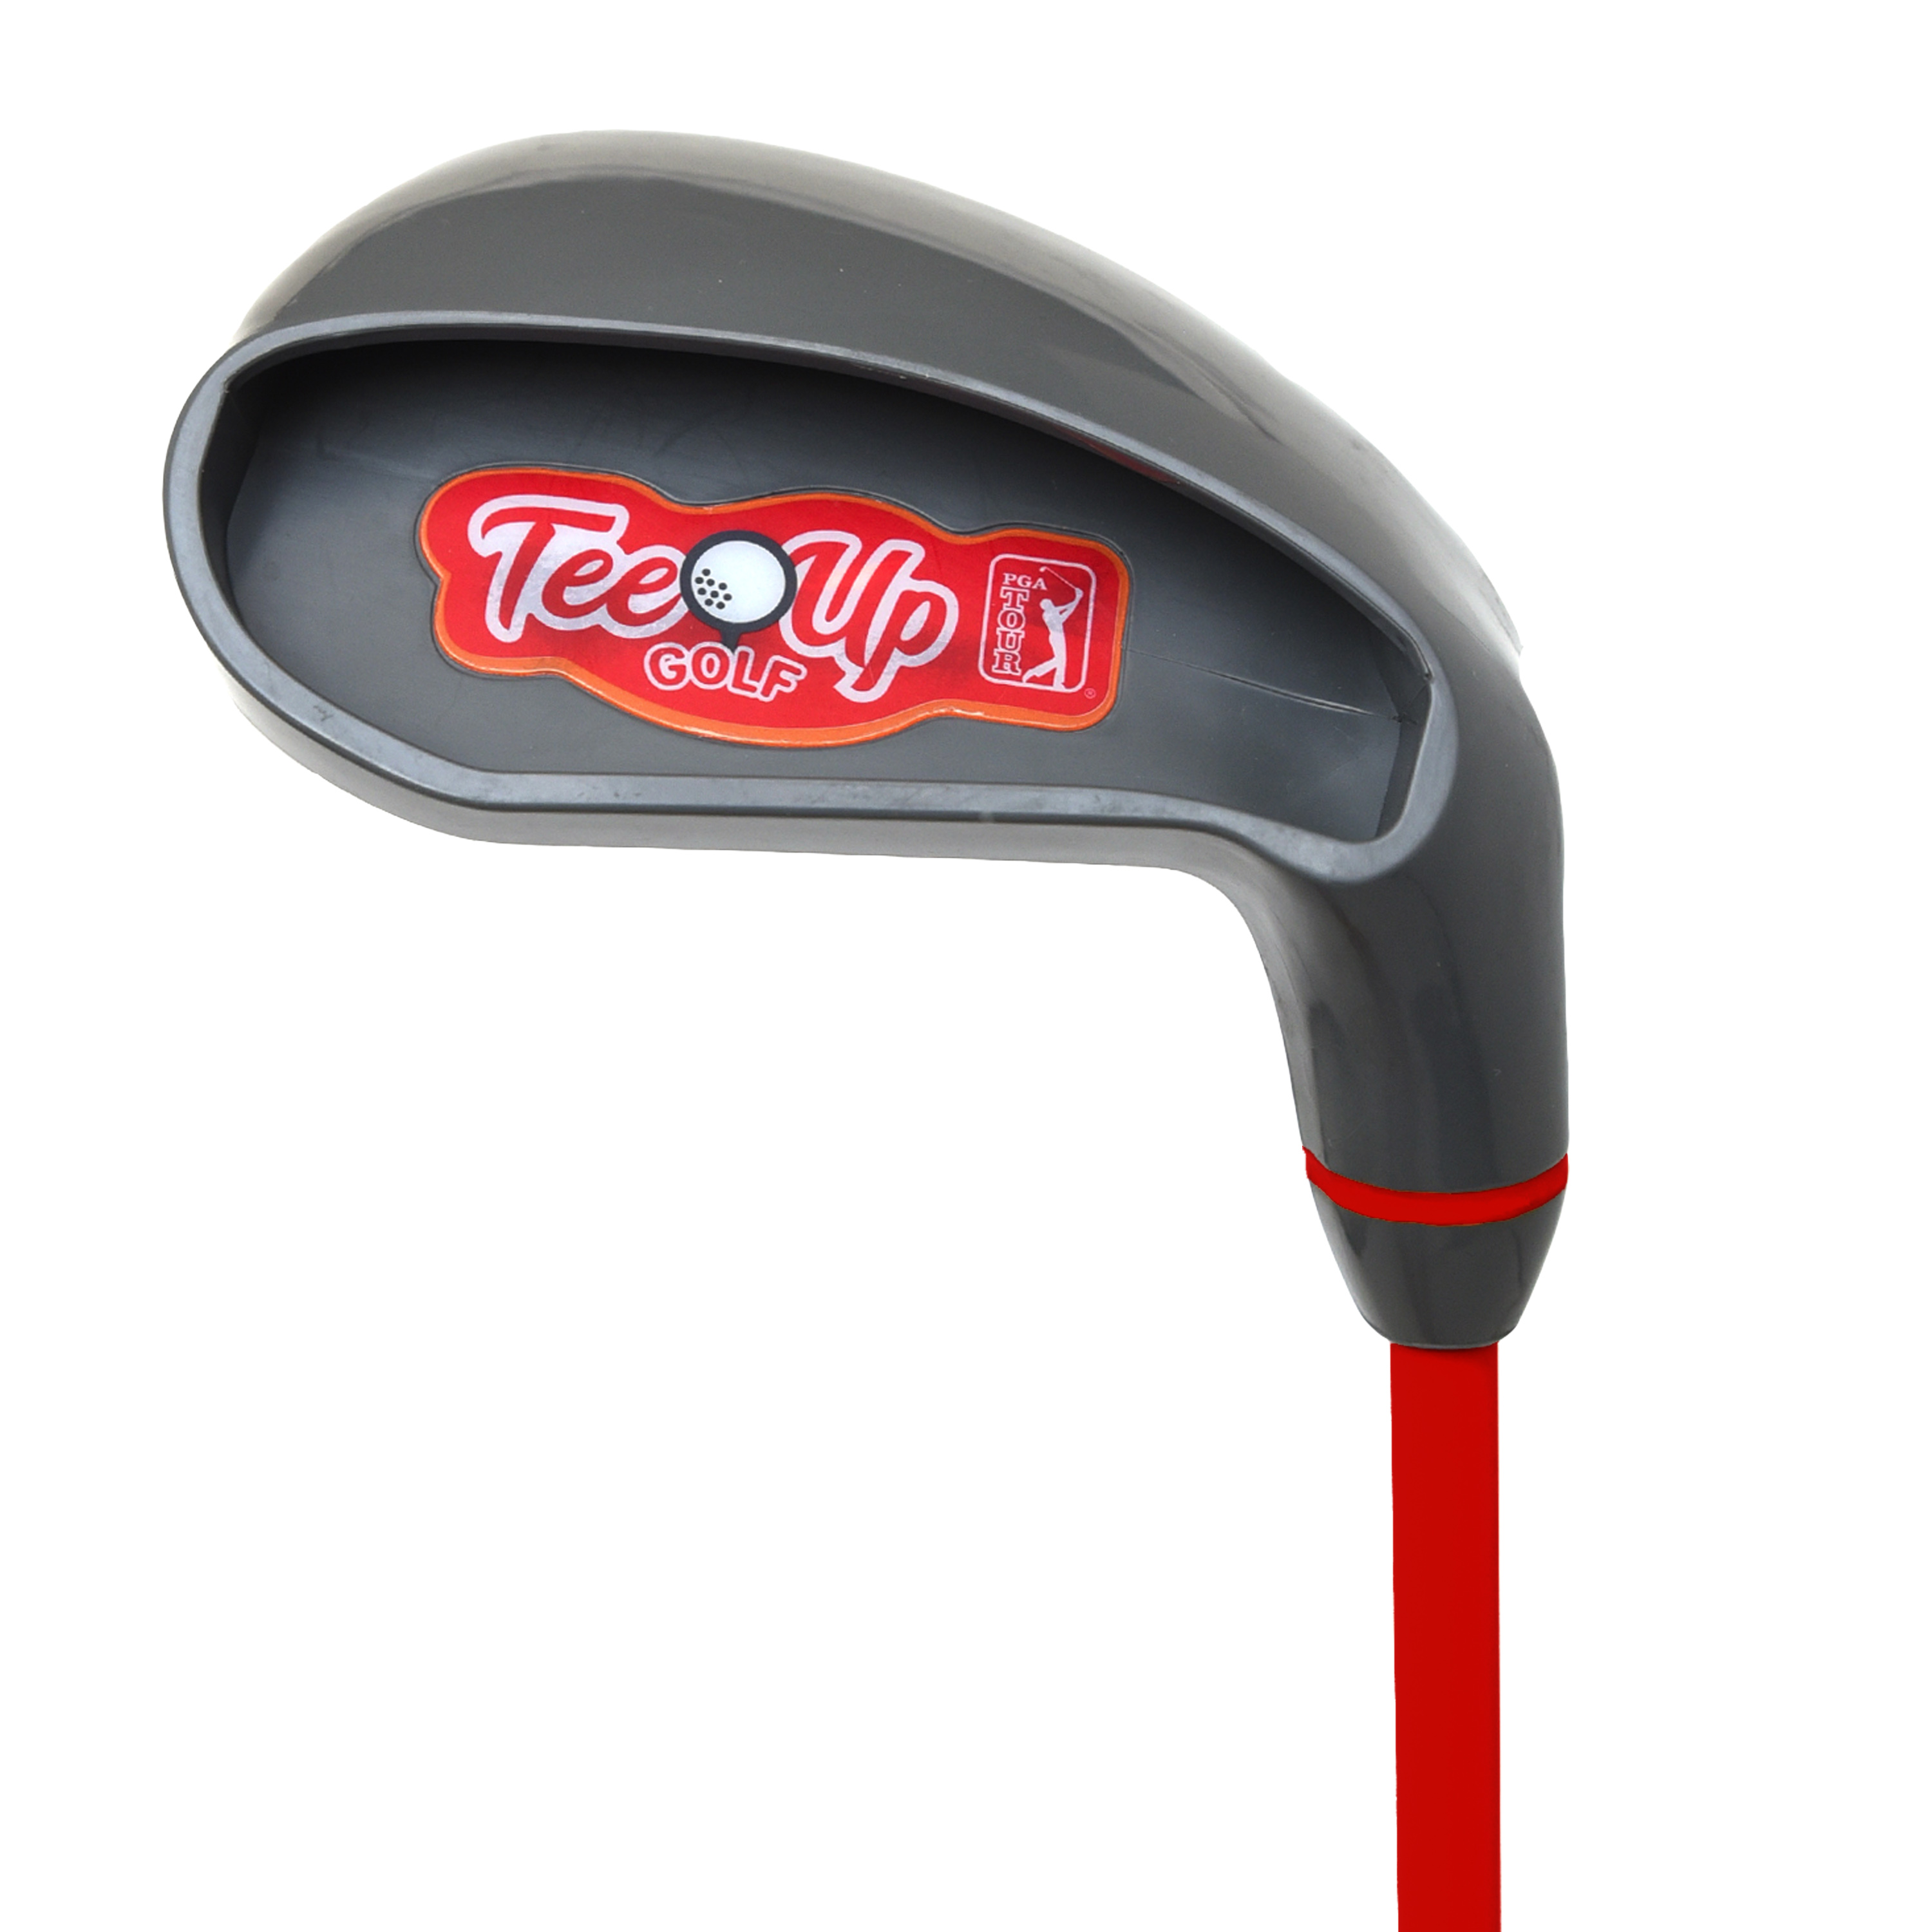 PGA Tour Tee-Up Kids Iron Golf Club, Small, Red Right Handed Dexterity - image 1 of 7